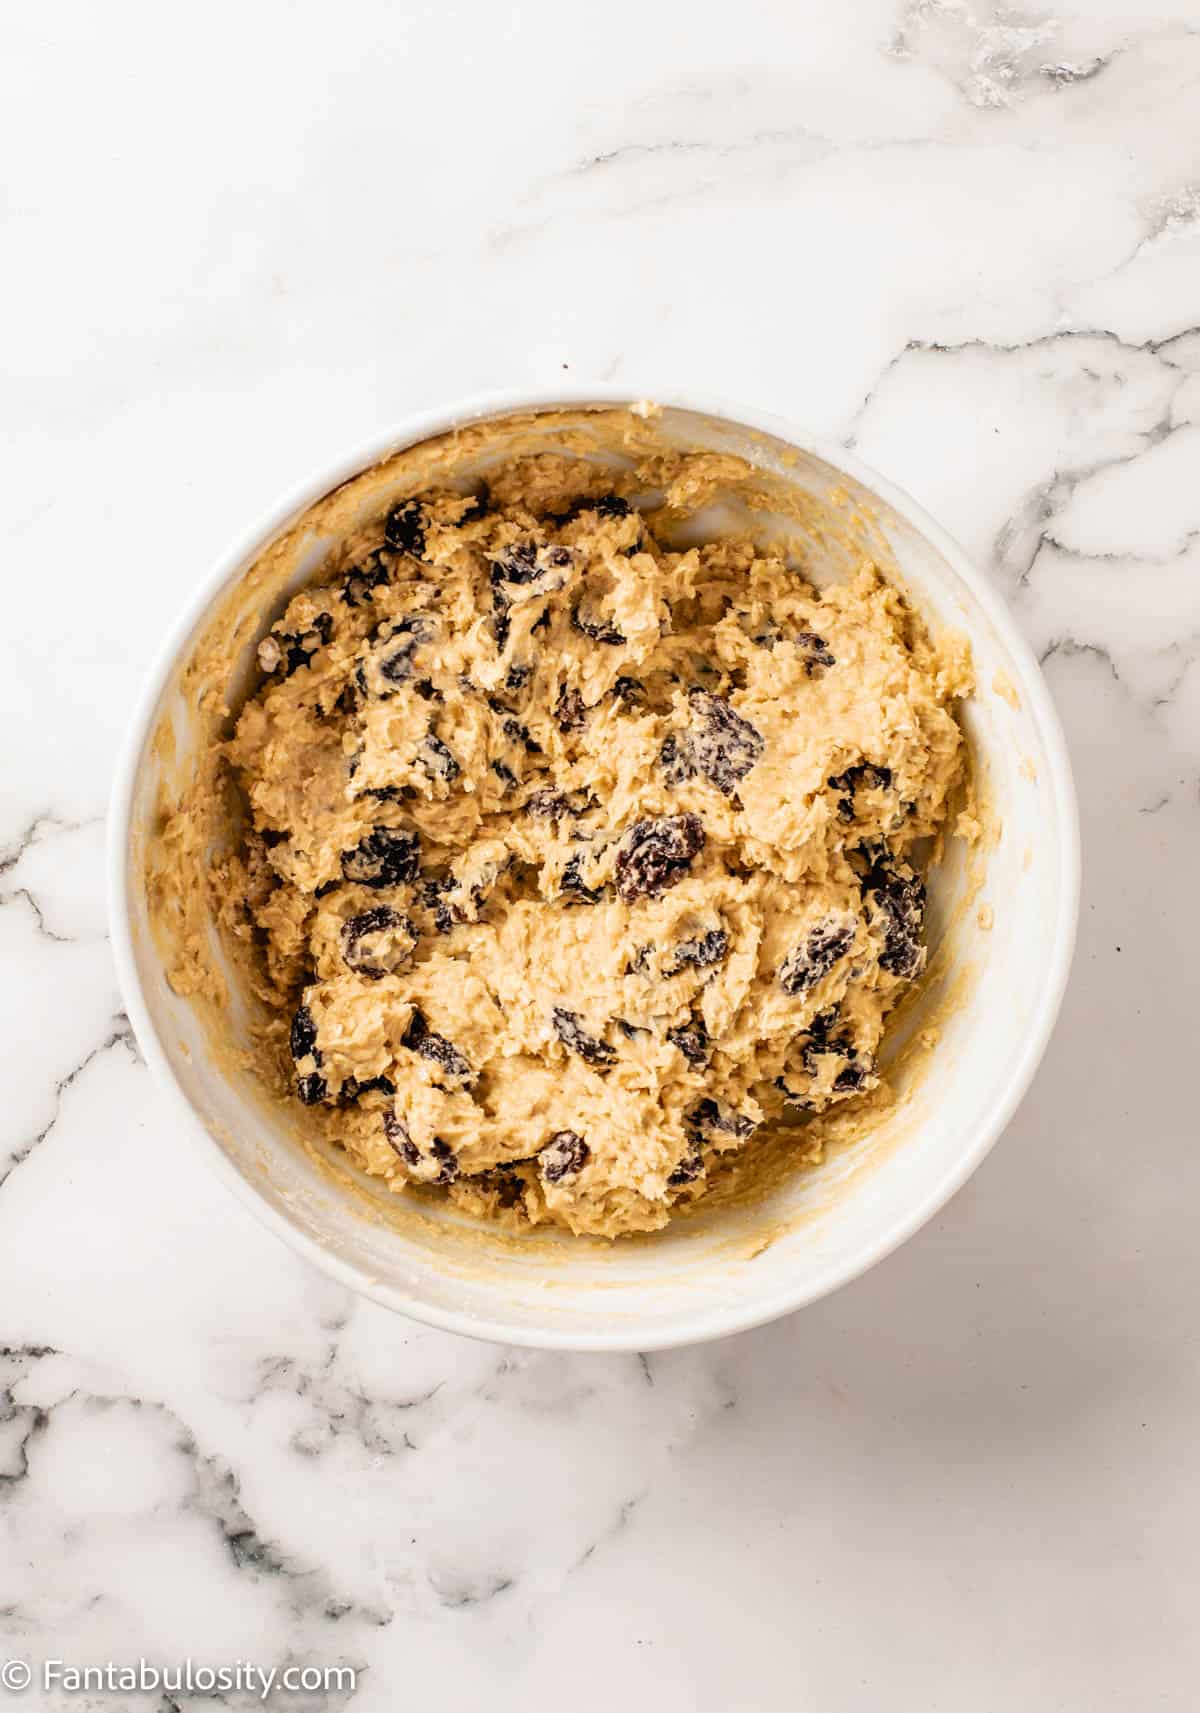 Oatmeal Raisin Cookie batter in a bowl.